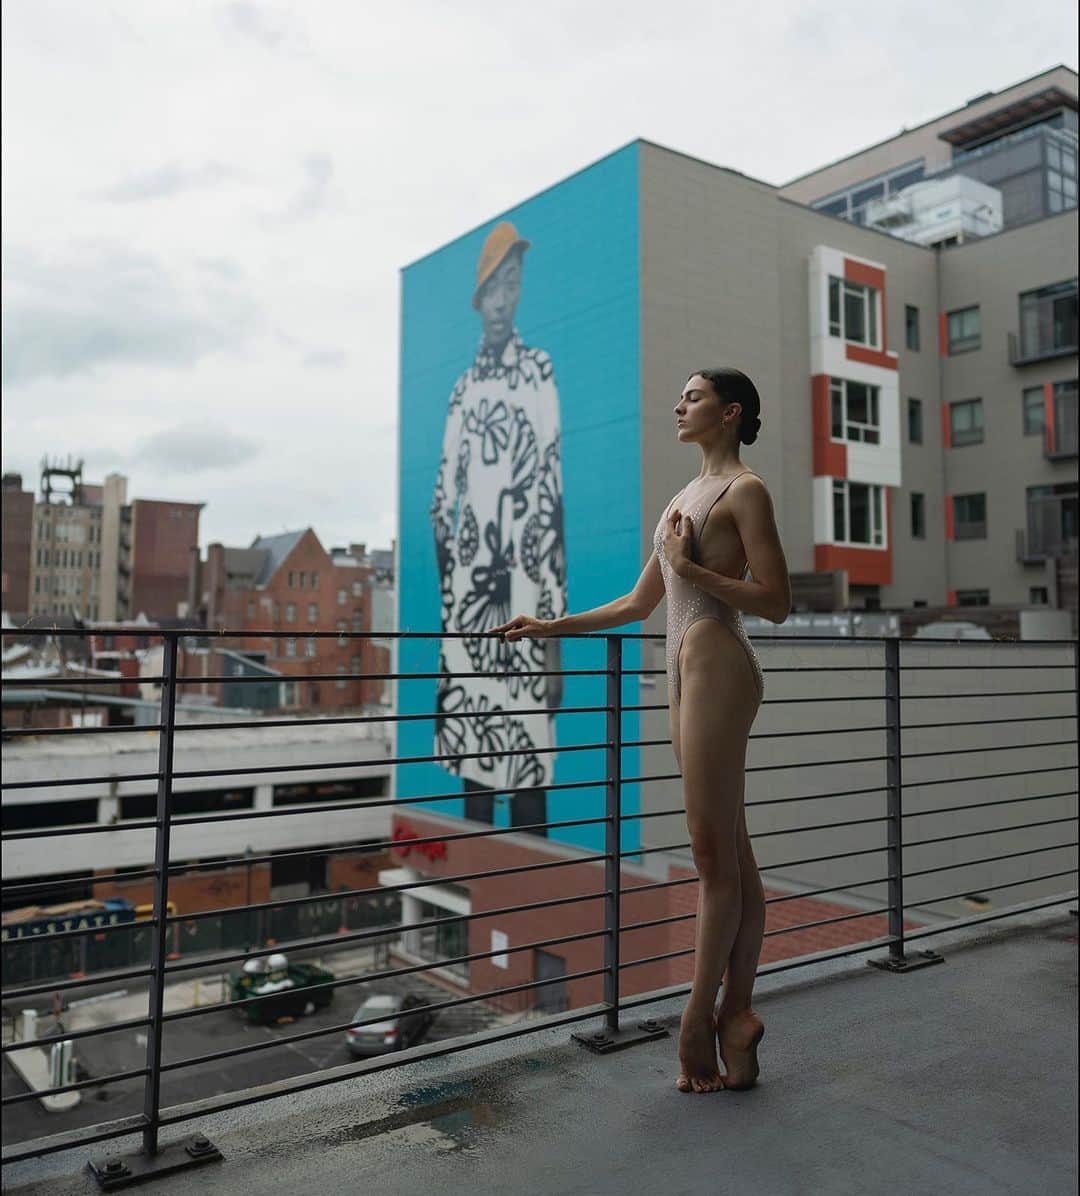 ballerina projectさんのインスタグラム写真 - (ballerina projectInstagram)「𝐒𝐲𝐝𝐧𝐞𝐲 𝐃𝐨𝐥𝐚𝐧 in Philadelphia.   @sydney_dolan_ballet #sydneydolan #ballerinaproject #ballerina #ballet #philadelphia #amysherald #streetart   Ballerina Project 𝗹𝗮𝗿𝗴𝗲 𝗳𝗼𝗿𝗺𝗮𝘁 𝗹𝗶𝗺𝗶𝘁𝗲𝗱 𝗲𝗱𝘁𝗶𝗼𝗻 𝗽𝗿𝗶𝗻𝘁𝘀 and 𝗜𝗻𝘀𝘁𝗮𝘅 𝗰𝗼𝗹𝗹𝗲𝗰𝘁𝗶𝗼𝗻𝘀 on sale in our Etsy store. Link is located in our bio.  𝙎𝙪𝙗𝙨𝙘𝙧𝙞𝙗𝙚 to the 𝐁𝐚𝐥𝐥𝐞𝐫𝐢𝐧𝐚 𝐏𝐫𝐨𝐣𝐞𝐜𝐭 on Instagram to have access to exclusive and never seen before content. 🩰」6月2日 22時10分 - ballerinaproject_